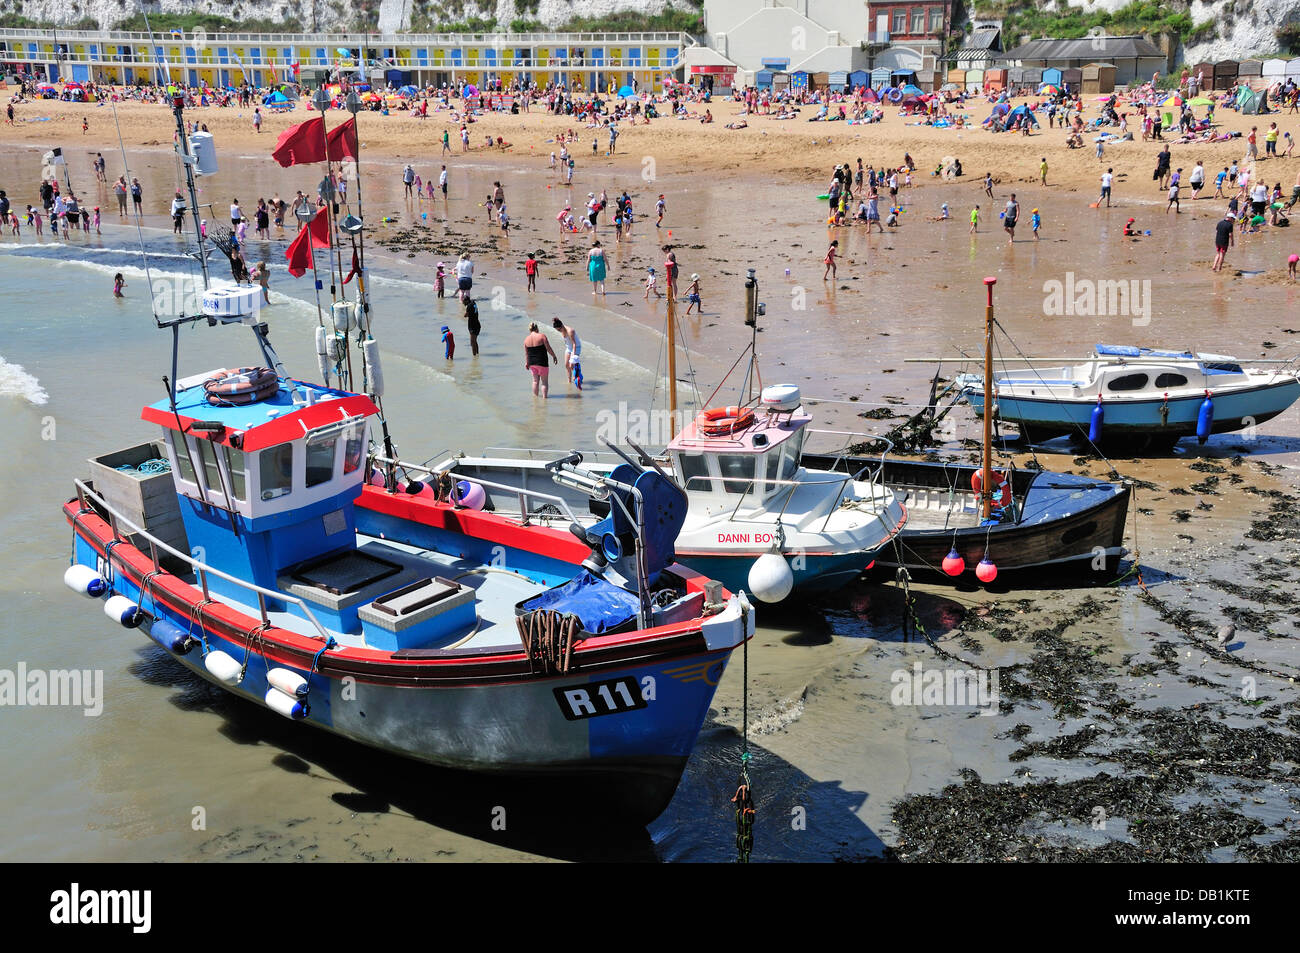 Broadstairs, Kent, England, UK. Fishing boats on the beach at low tide Stock Photo